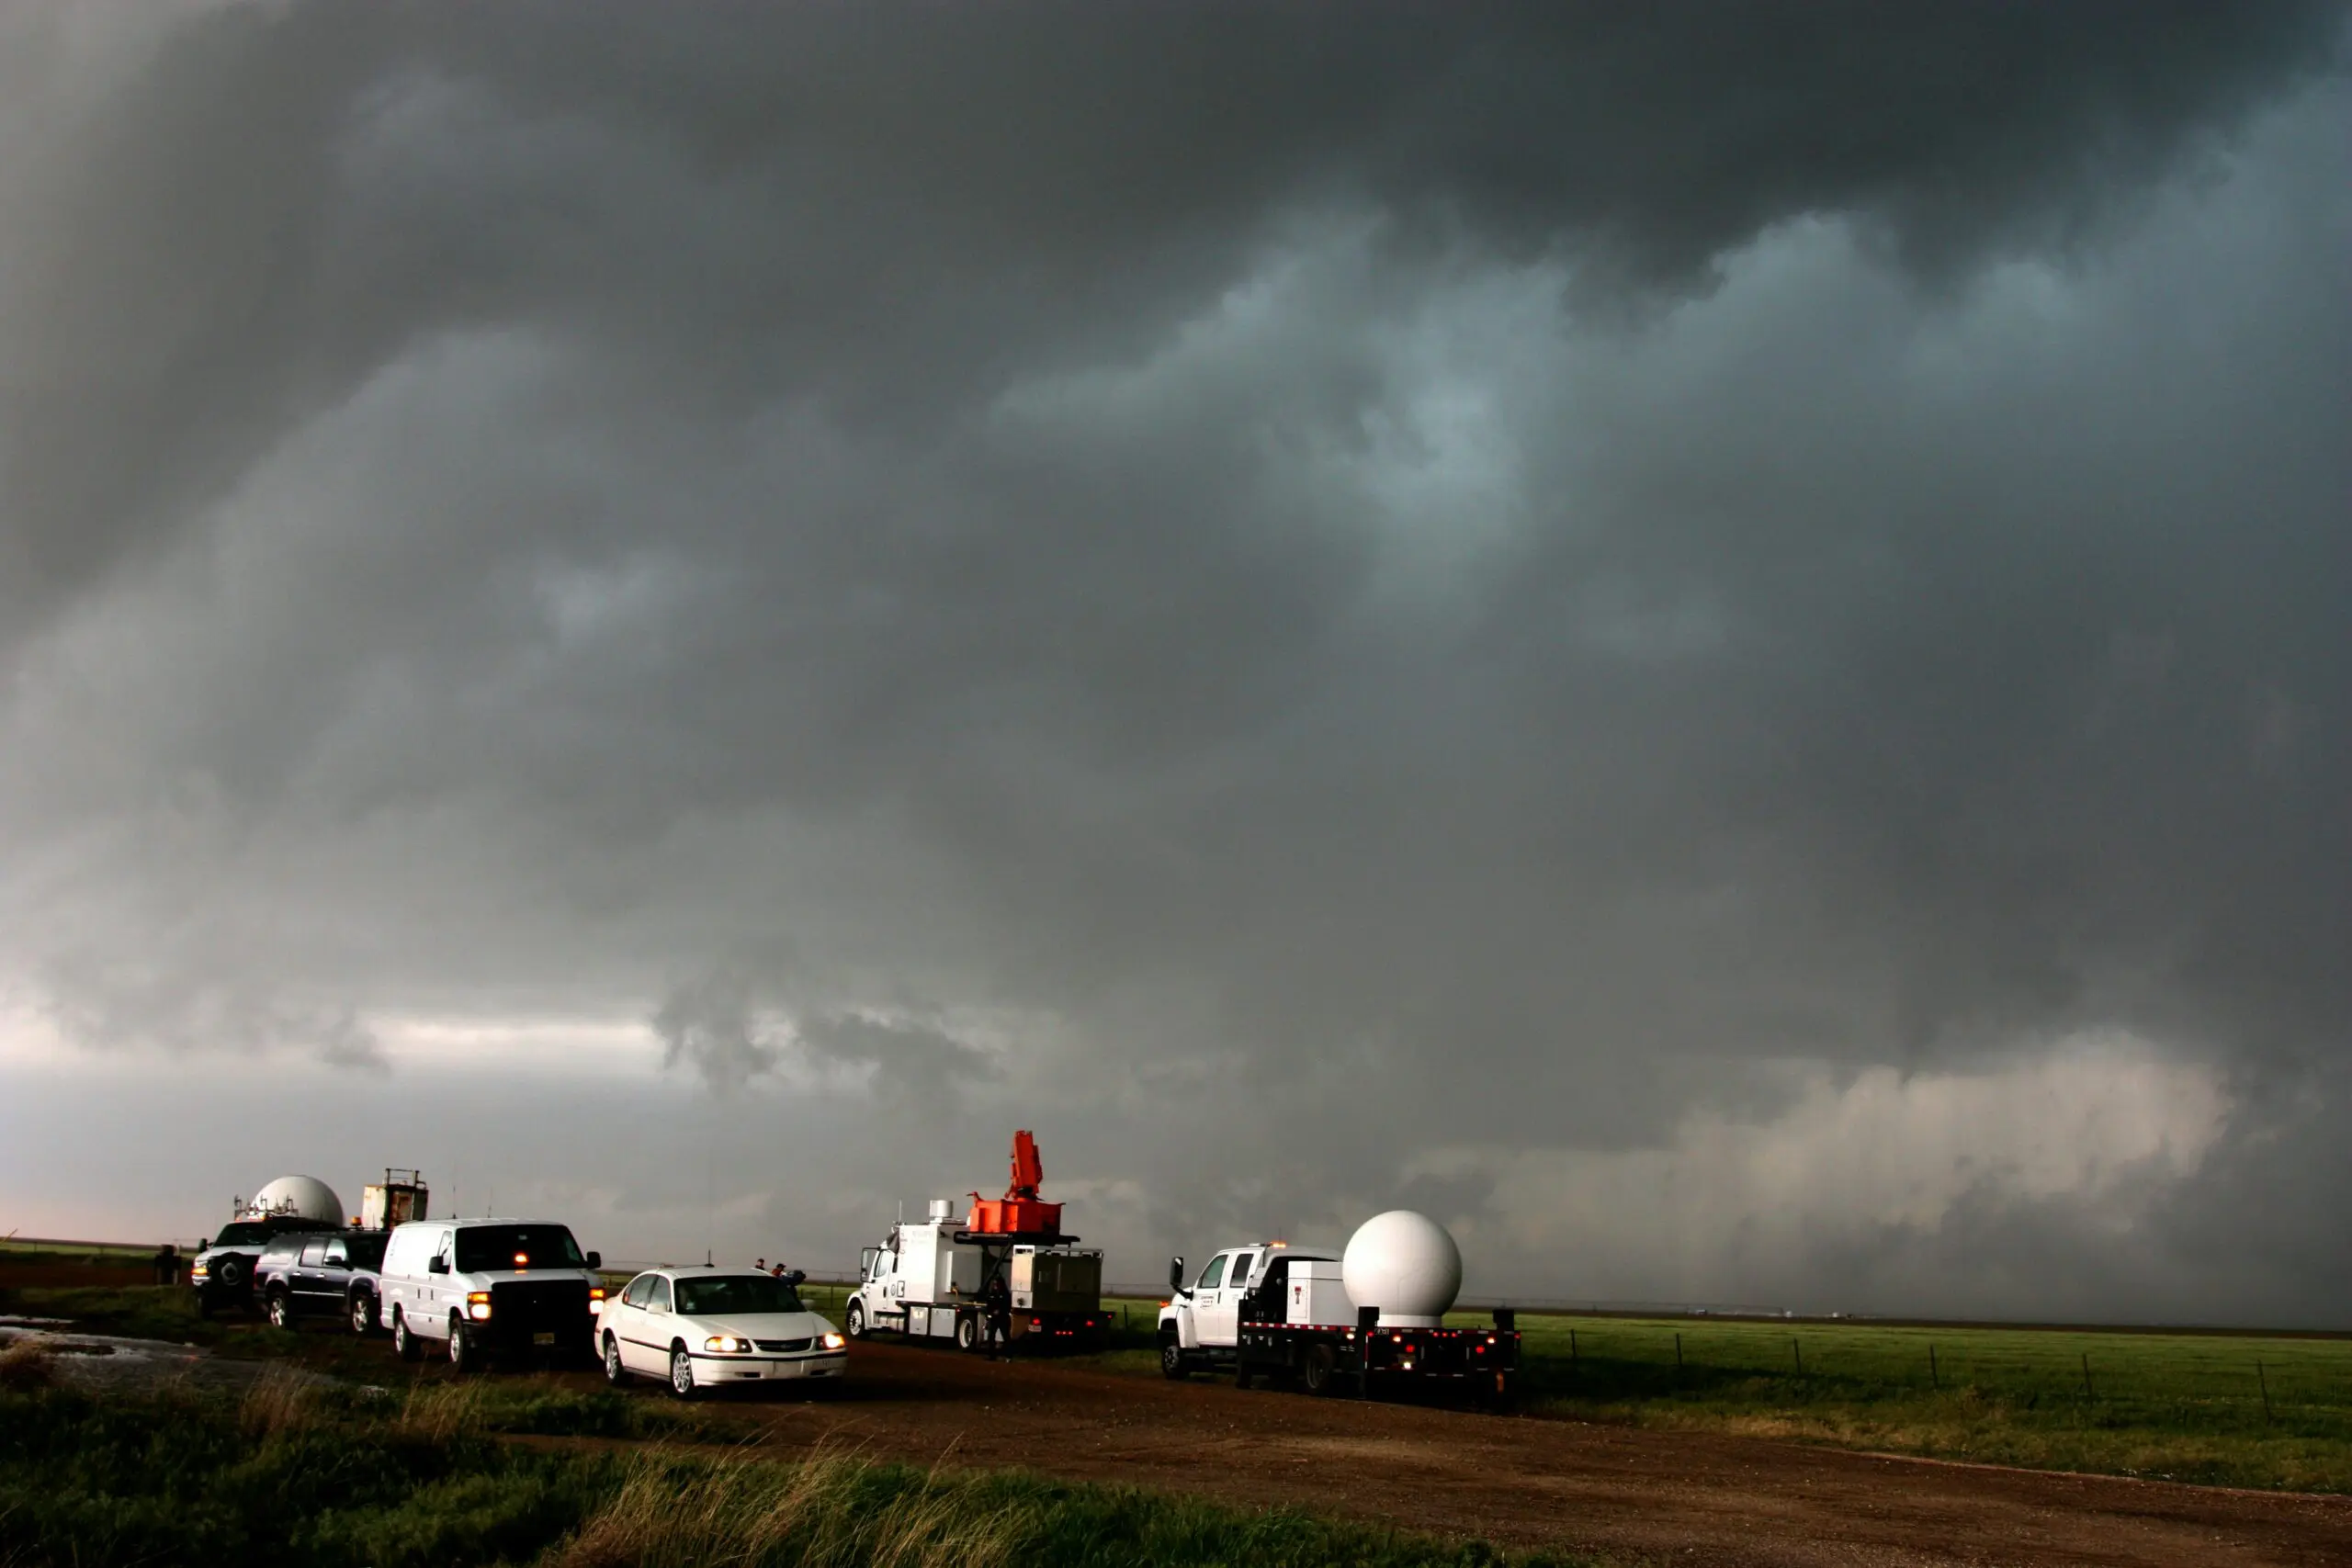 Storms in the background with weather trucks on the road taken by noaa